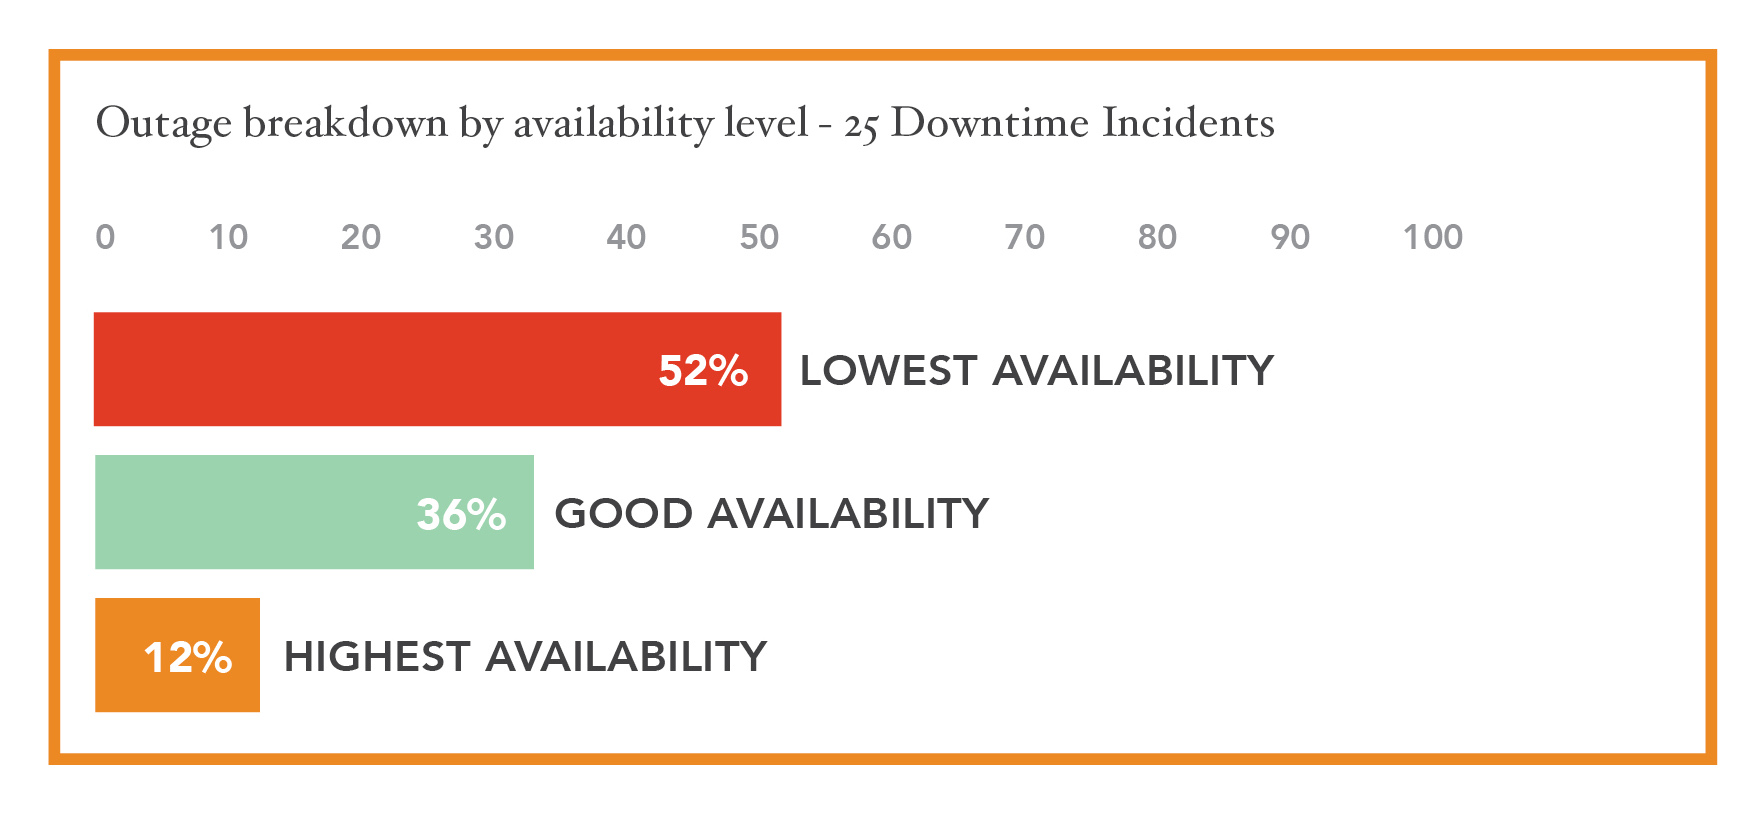 Figure 2: Outage breakdowns by availability